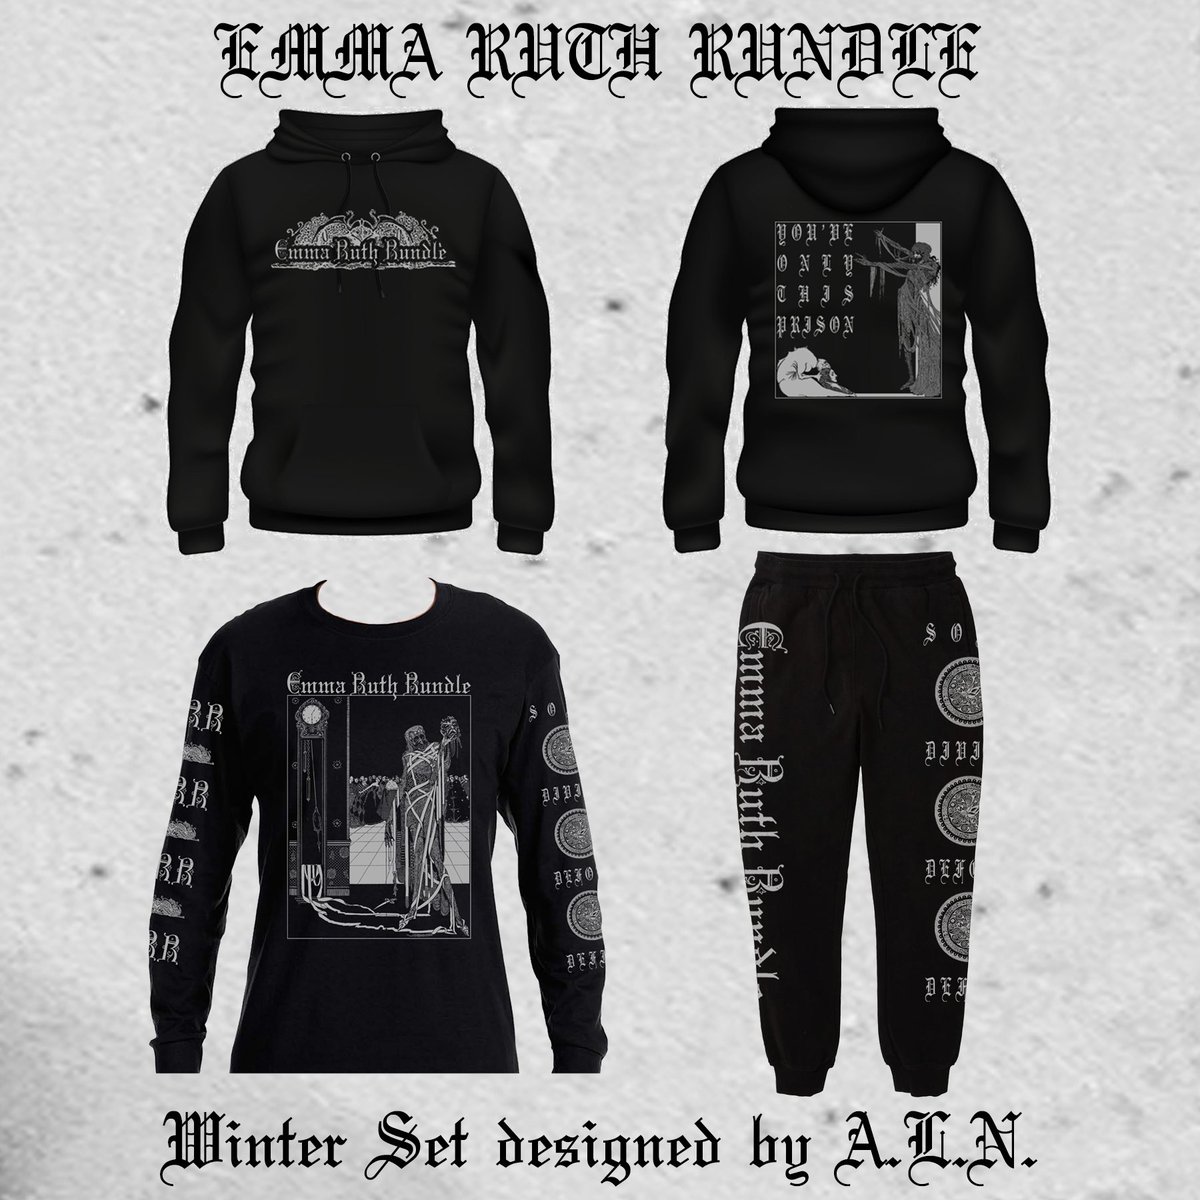 New WINTER SWEATSUIT designed by MIZMOR exclusive at @hellomerch hellomerch.com/products/winte…